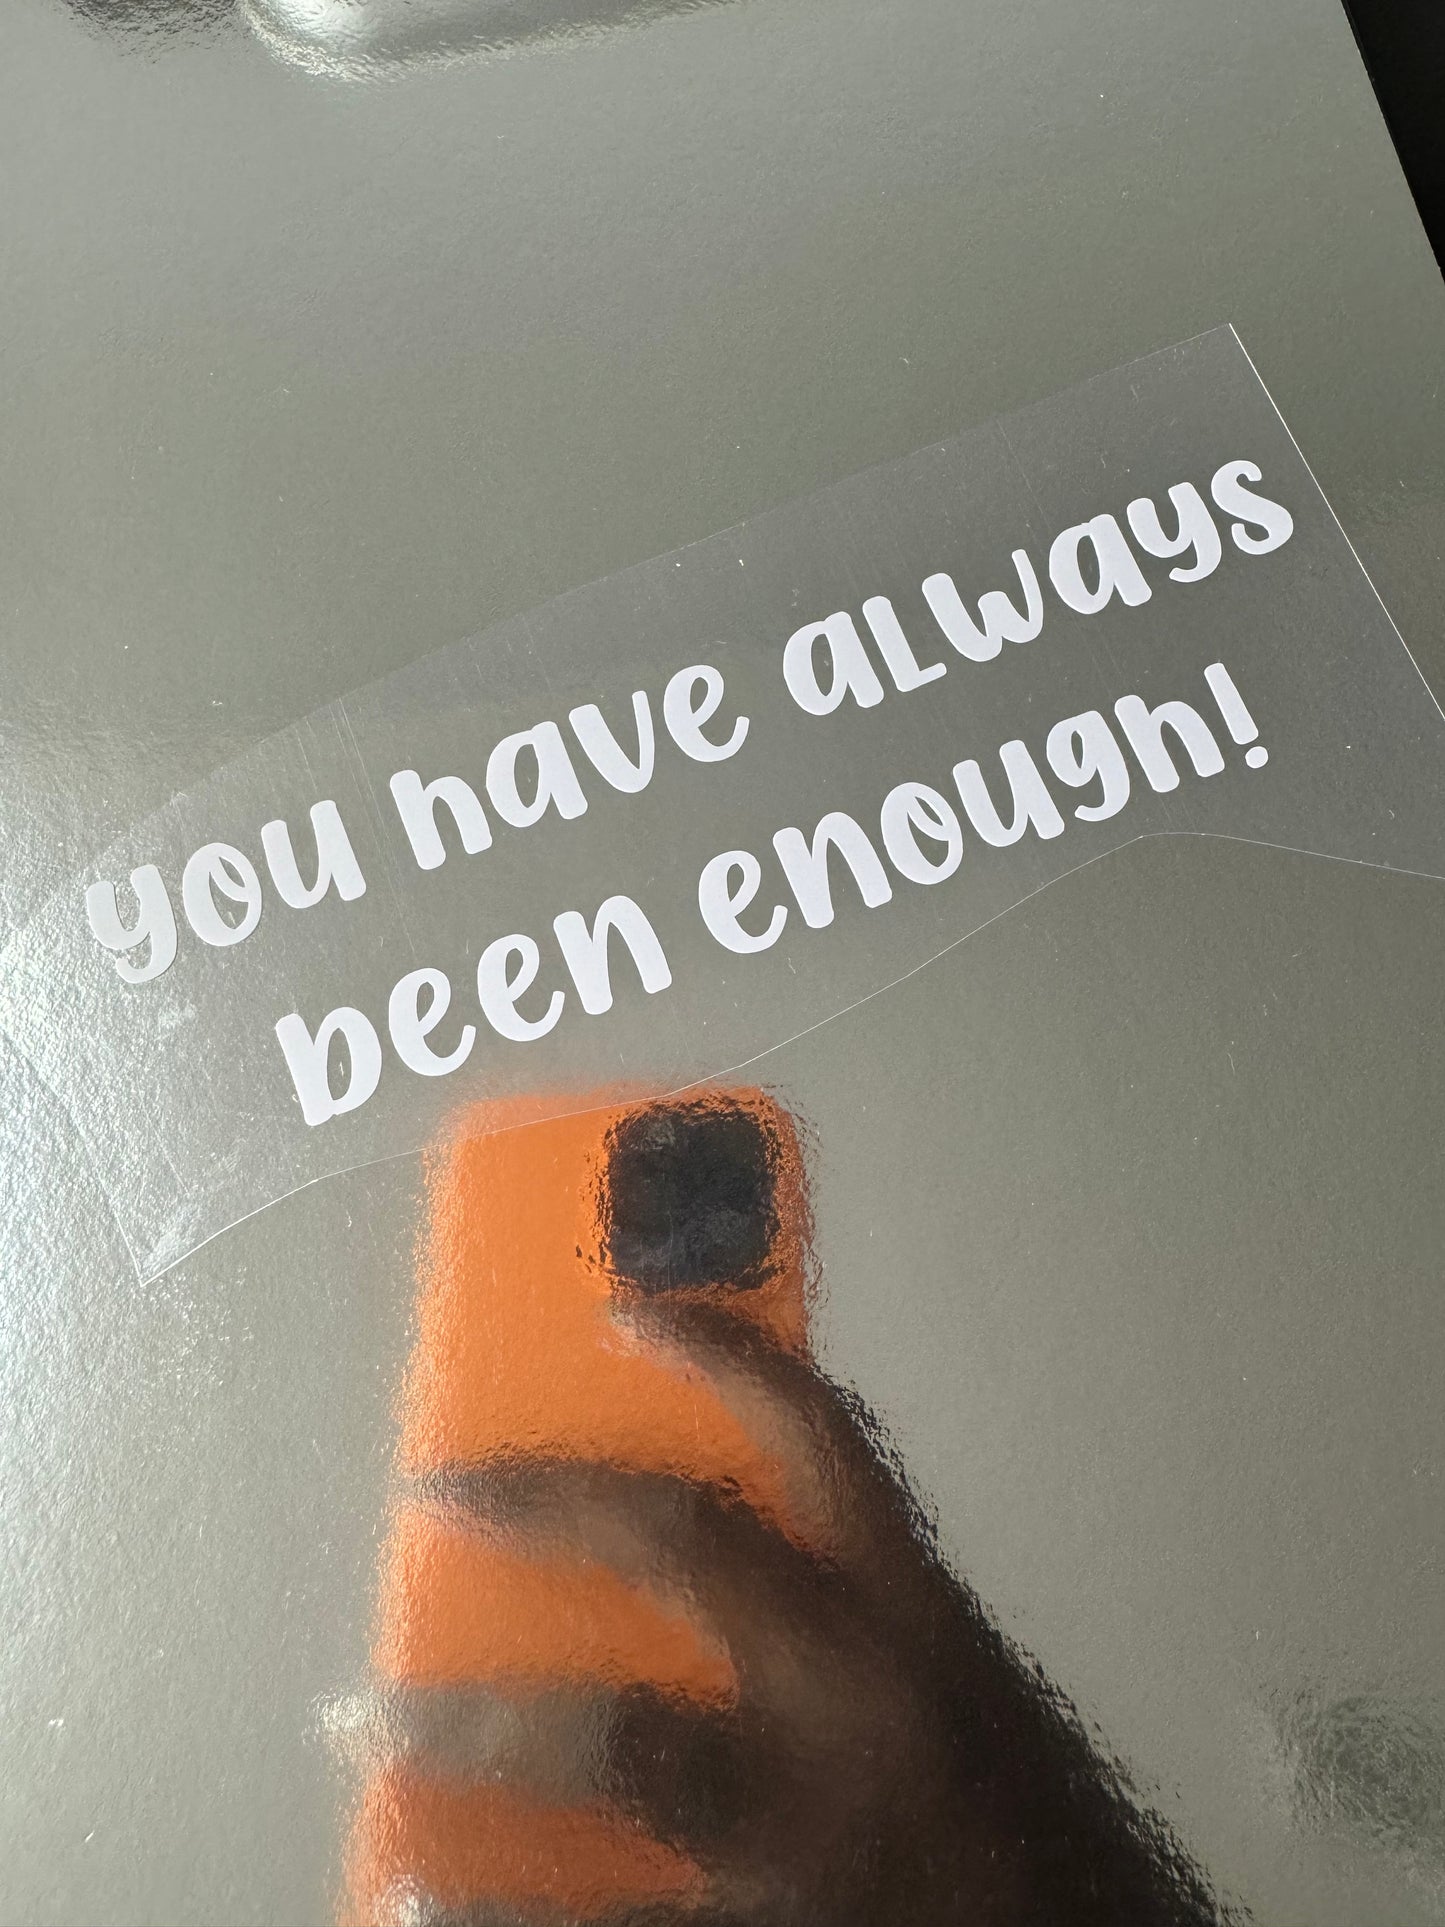 You Have Always Been Enough Mirror Decal